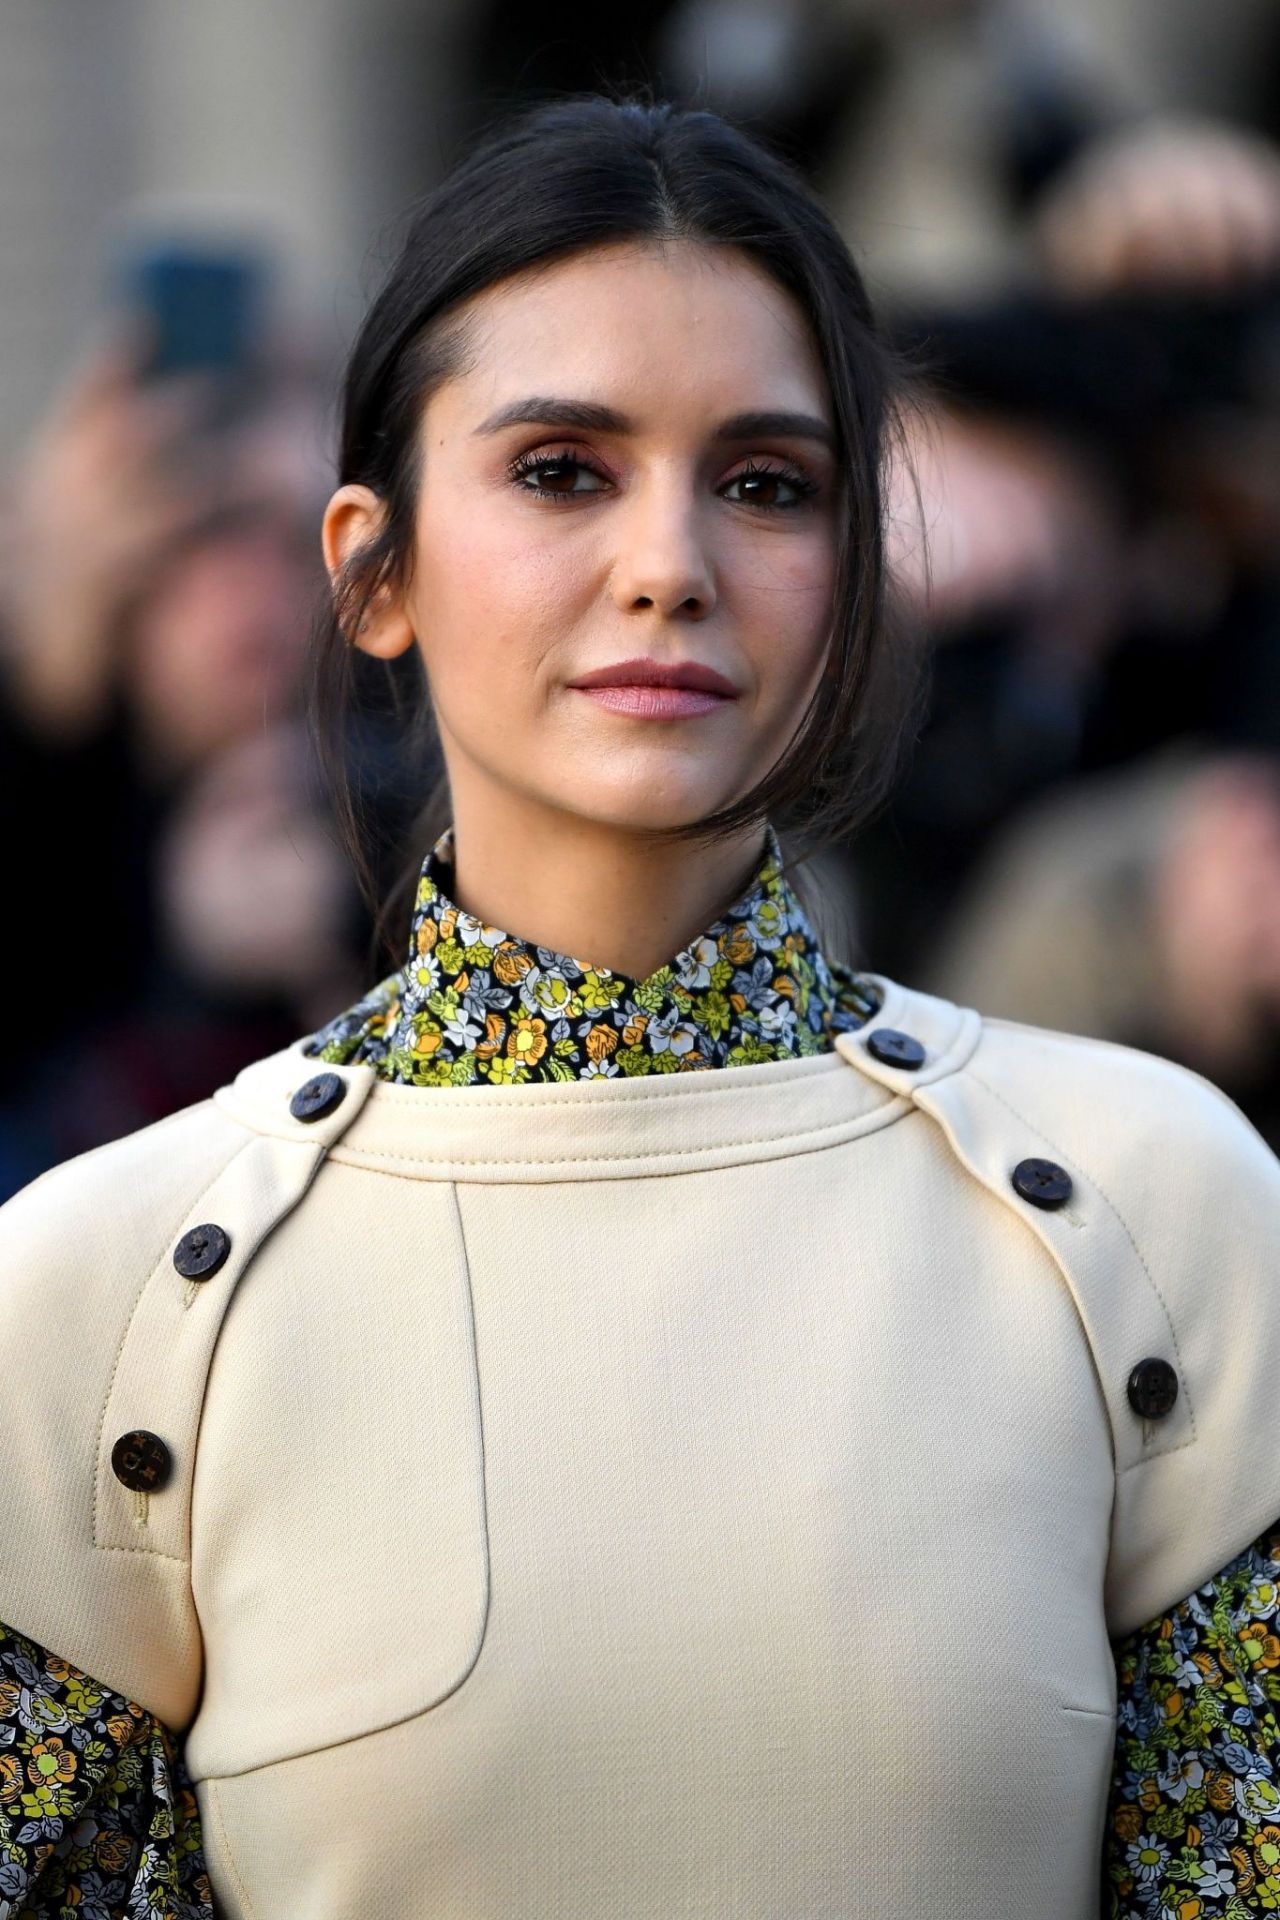 Nina Dobrev attends the Louis Vuitton Cruise 2020 Fashion Show at